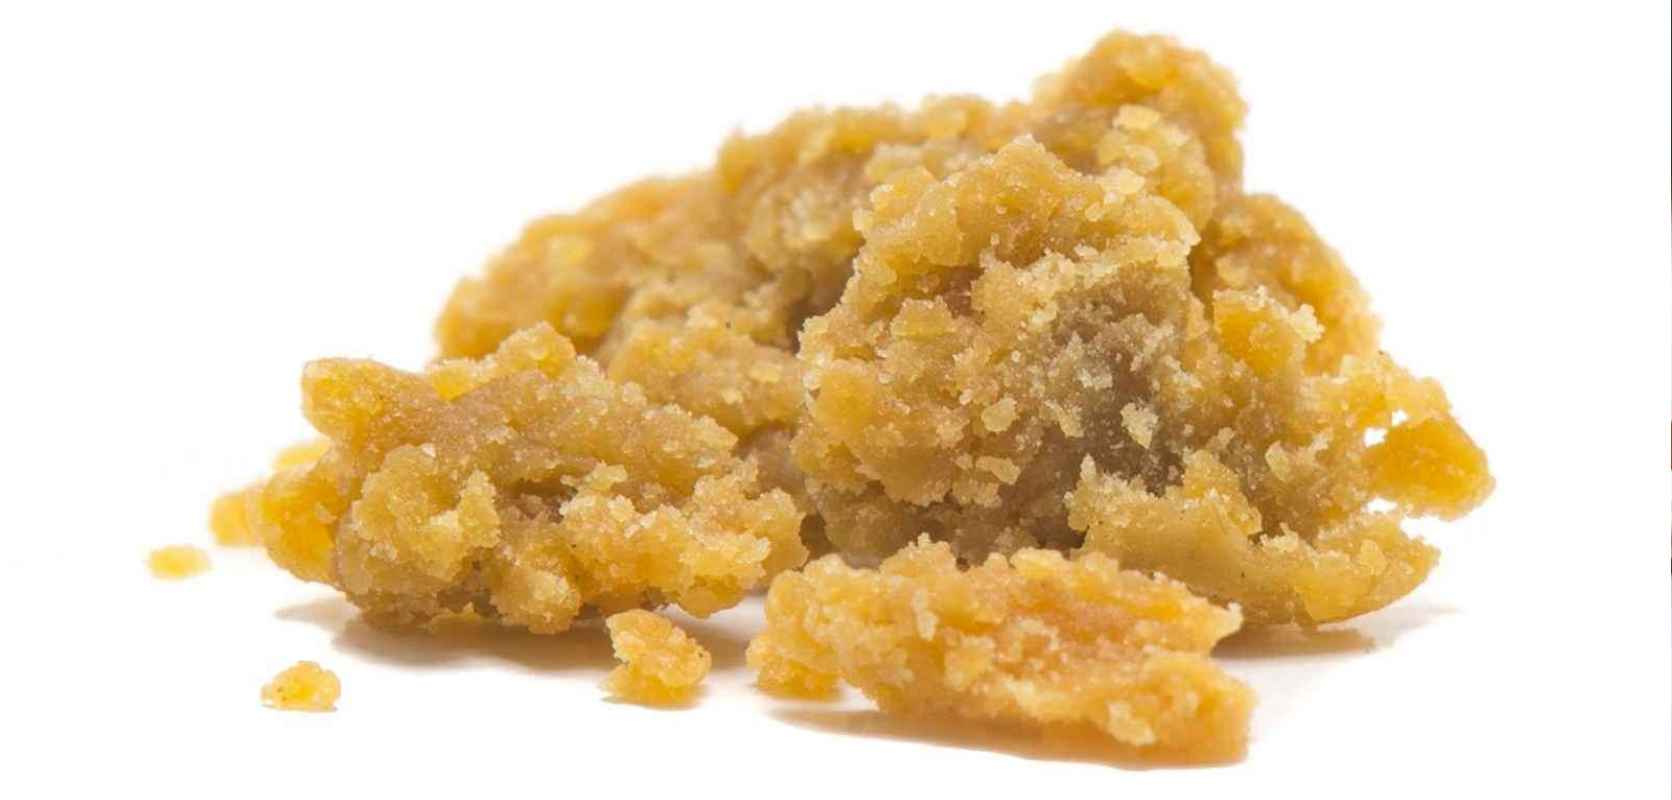 Crumble is a dry, powdery cannabis extract that crumbles when handled; it is sometimes called a honeycomb.